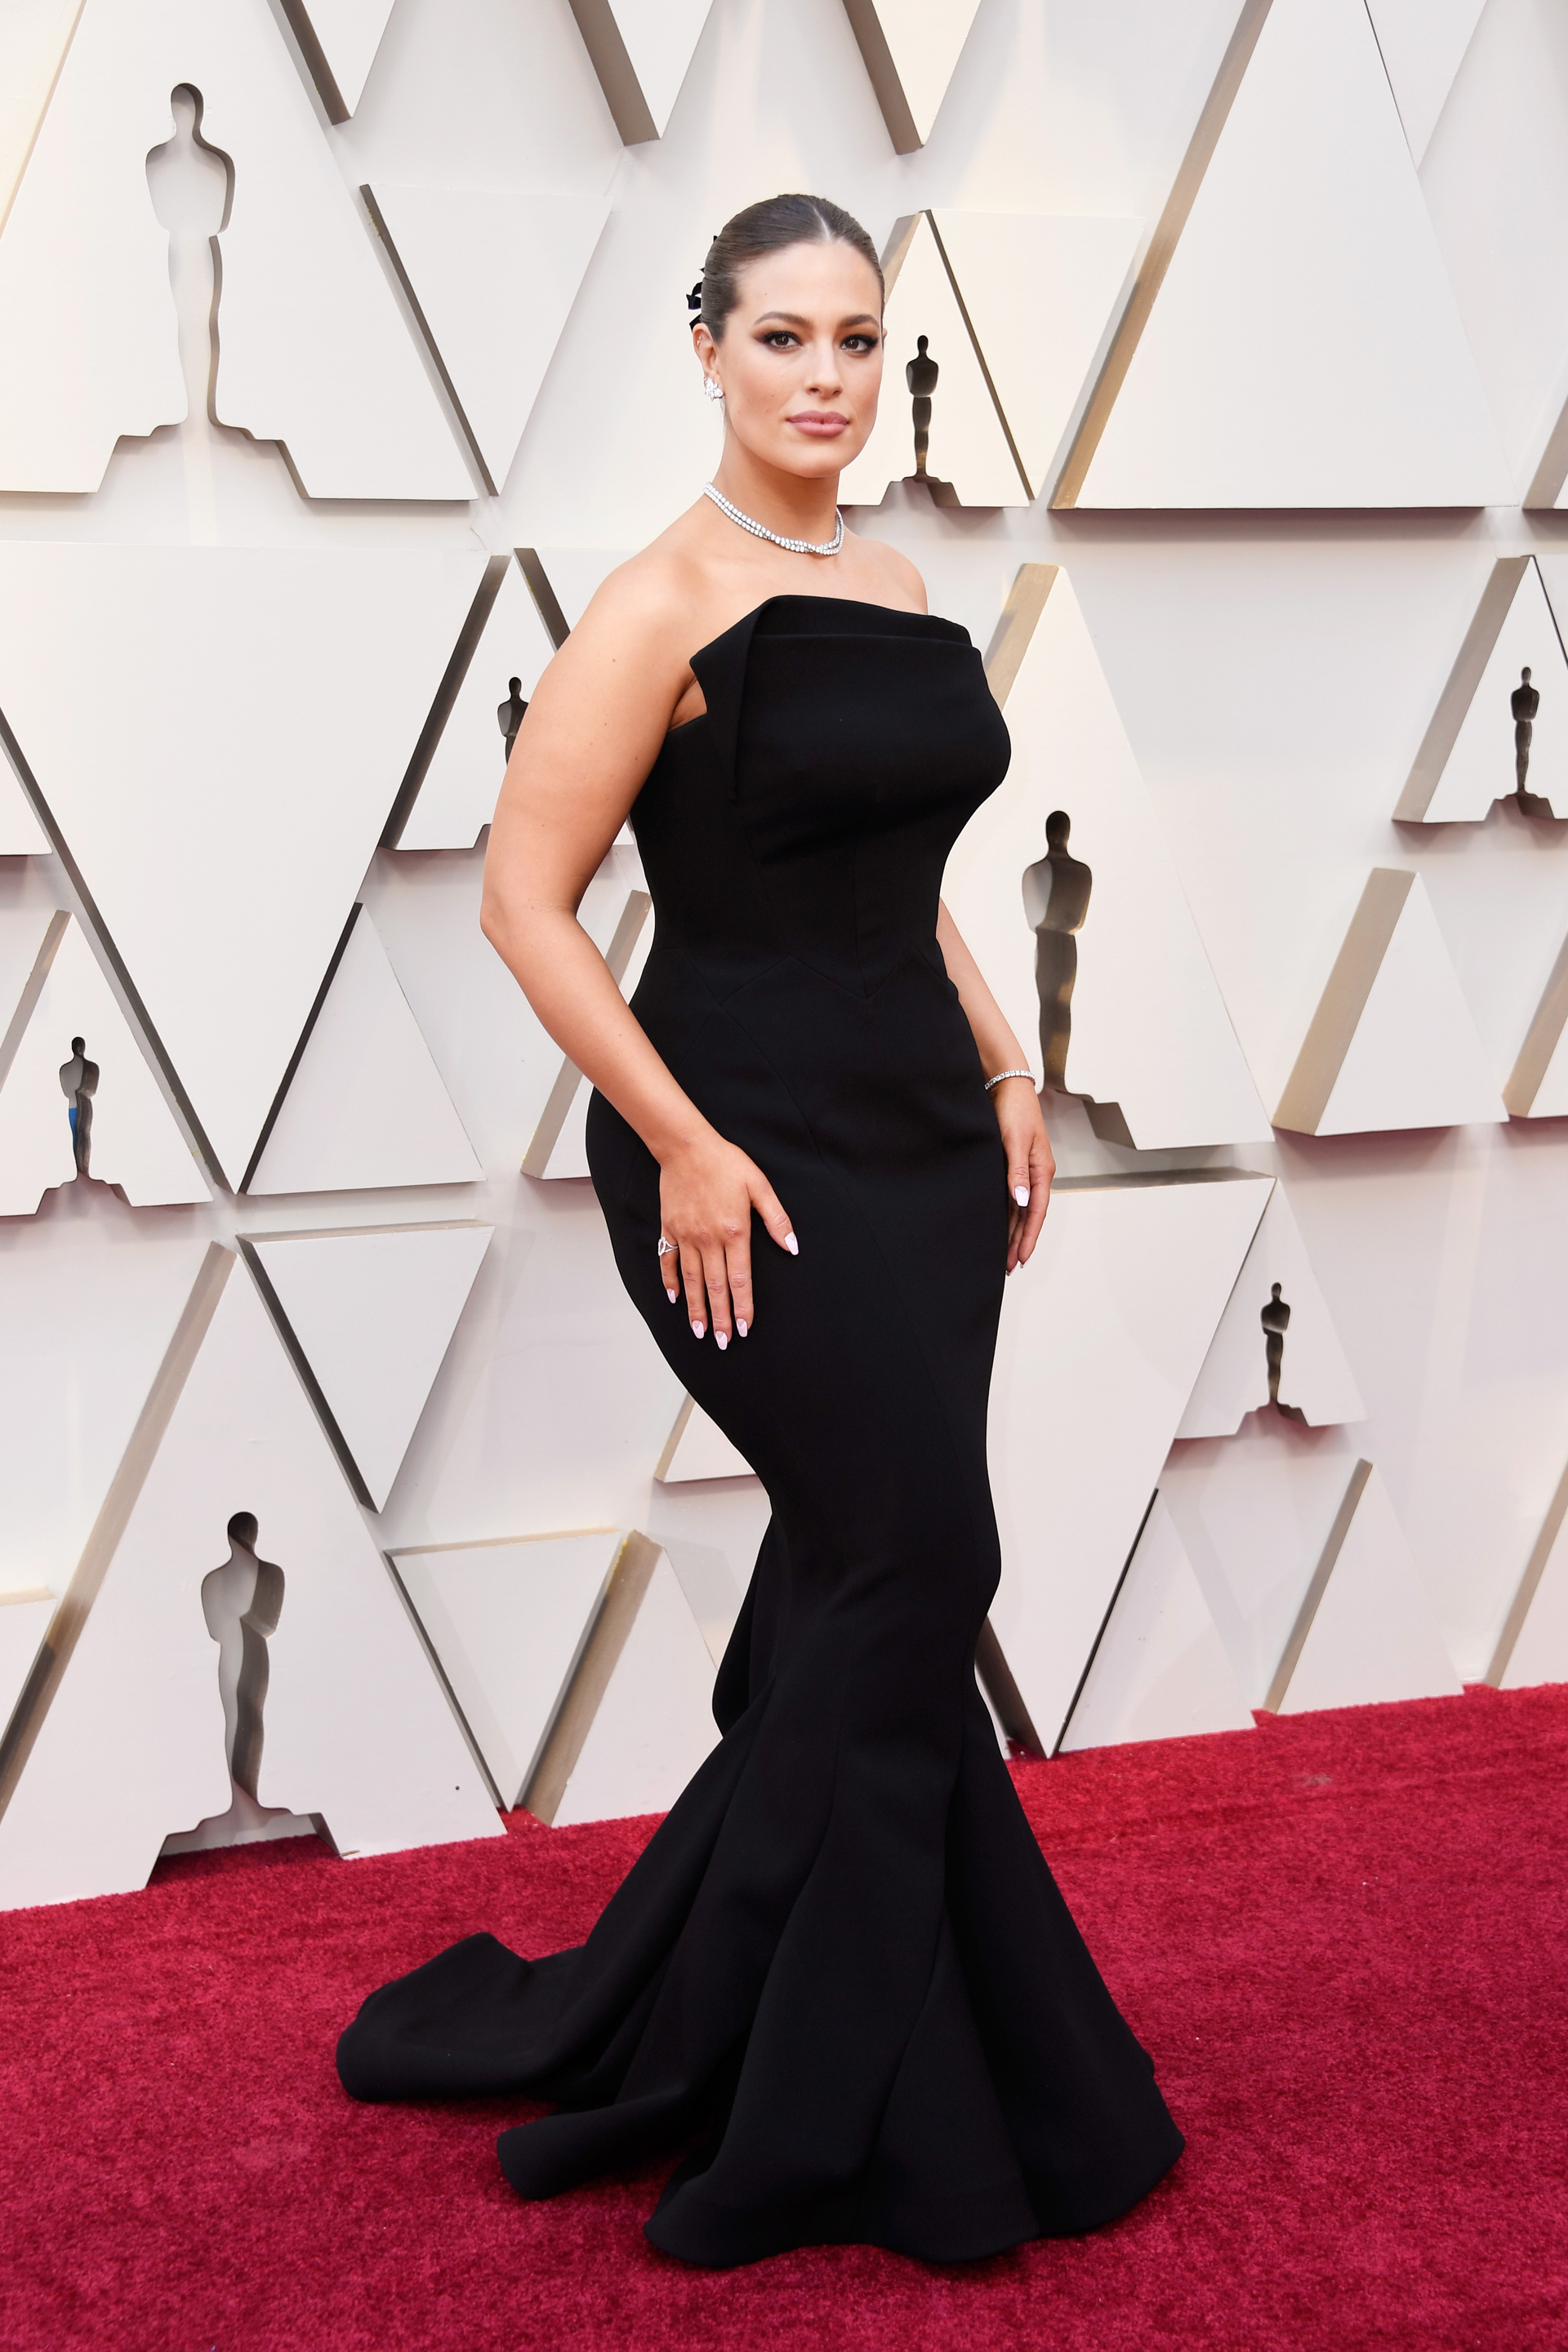 HOLLYWOOD, CALIFORNIA - FEBRUARY 24: Ashley Graham attends the 91st Annual Academy Awards at Hollywood and Highland on February 24, 2019 in Hollywood, California. Frazer Harrison/Getty Images/AFP